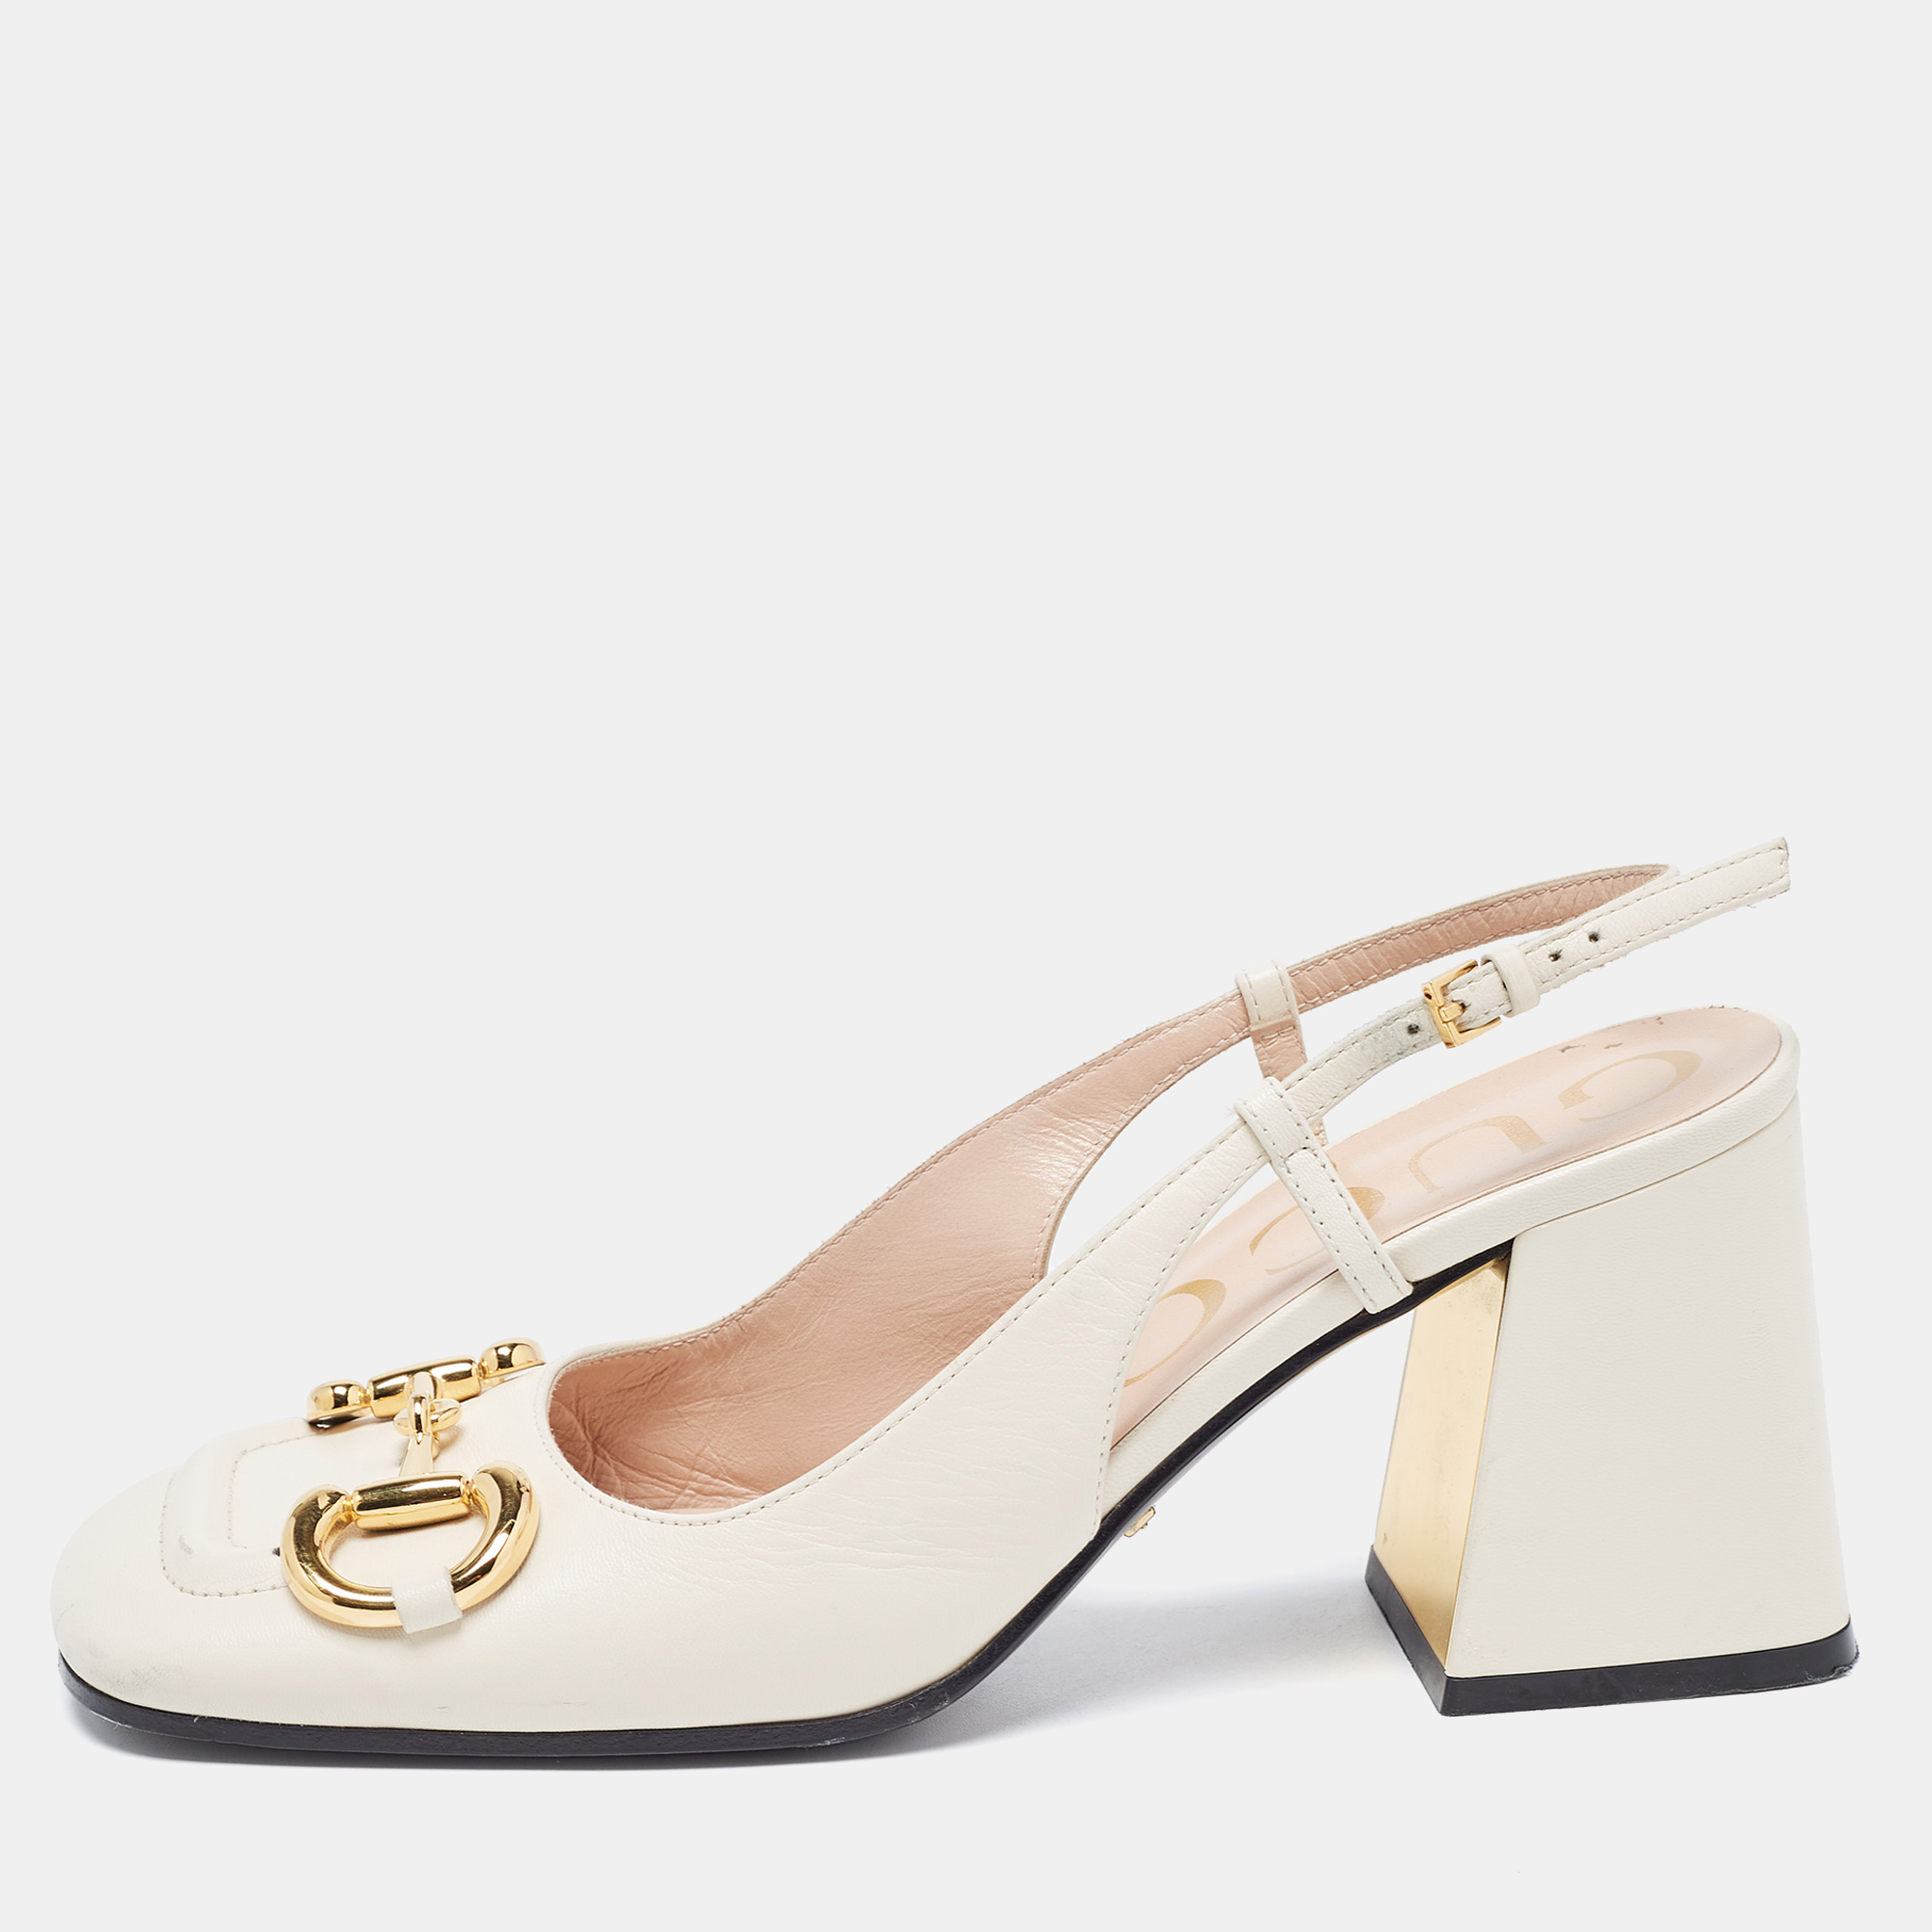 Pre-owned Gucci Cream Leather Horsebit Pumps Size 37.5